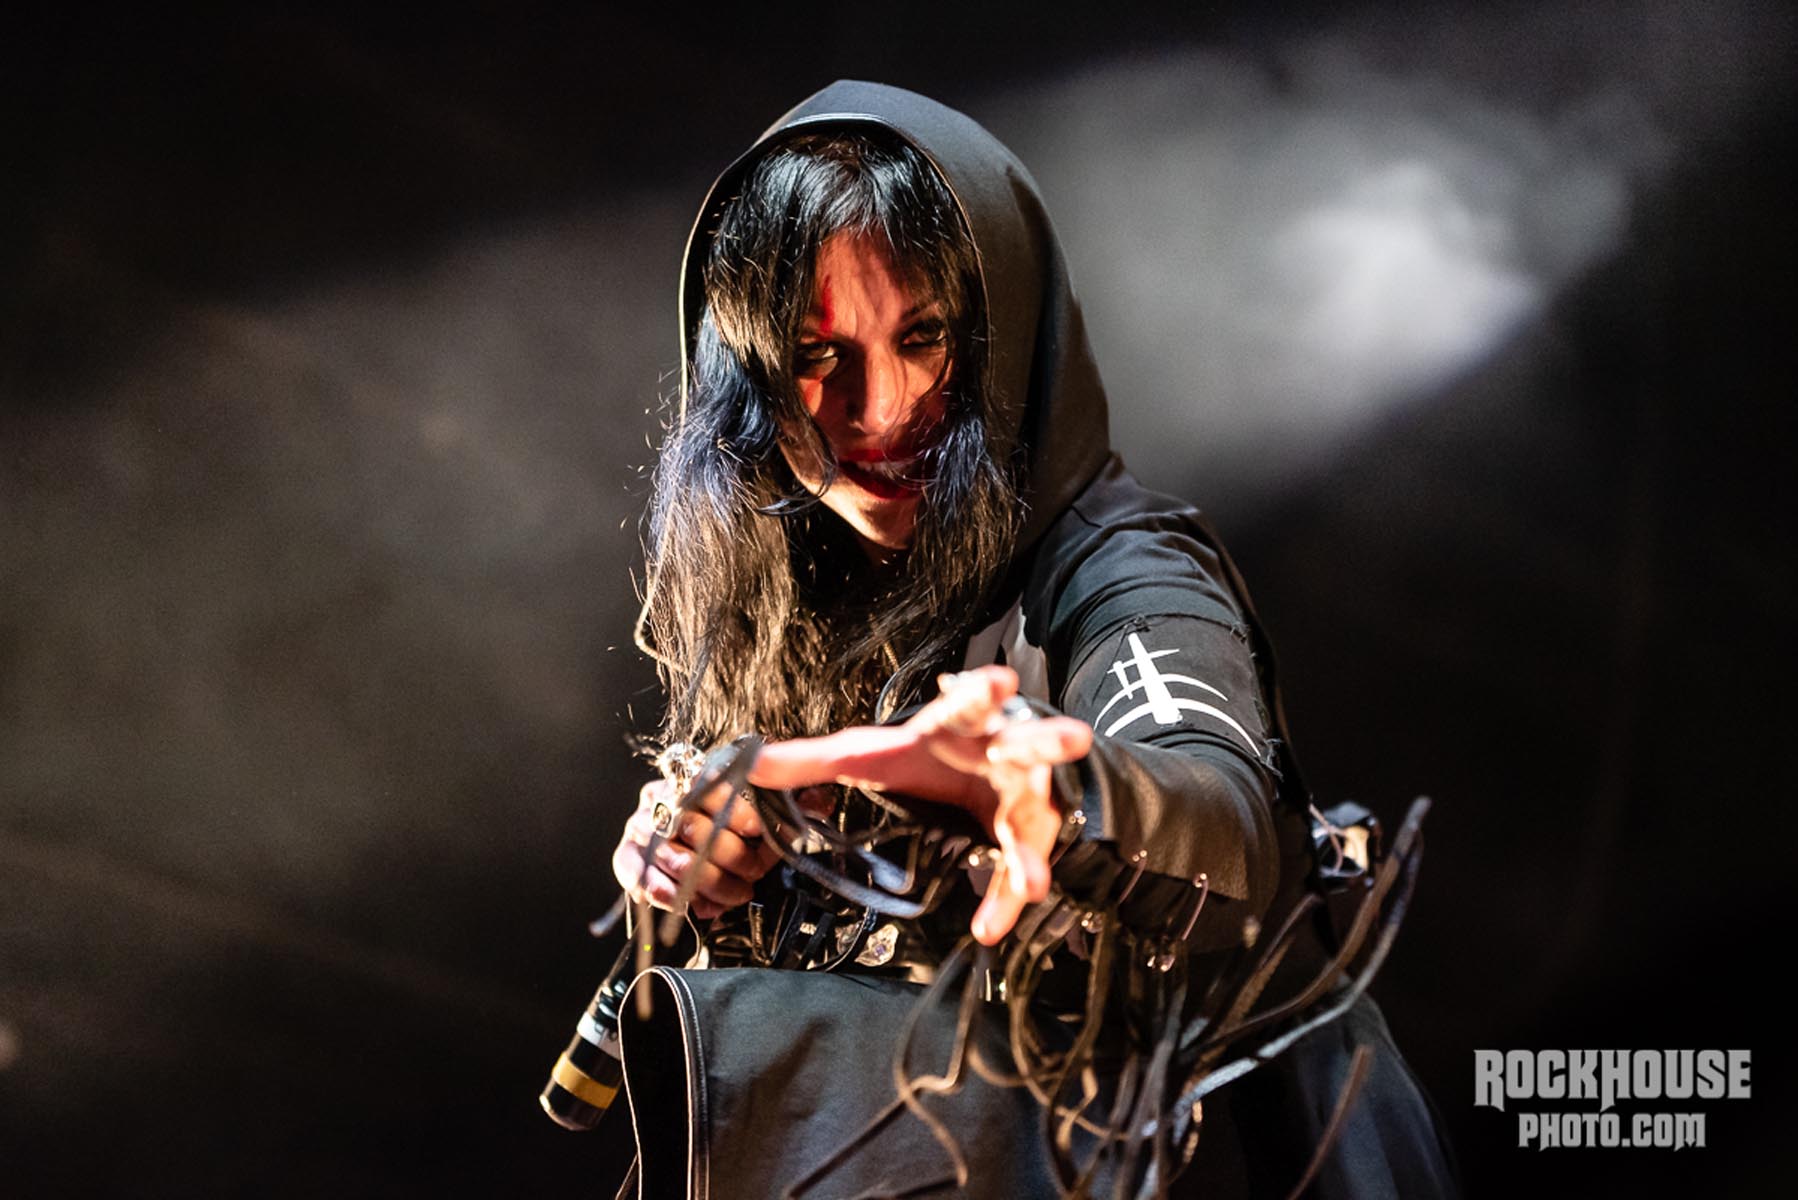 Lacuna Coil At The Masquerade Atlanta September 19th 2019 And i don't know what to say i'm thinking about you it's hurting without you i never learn from my mistakes. lacuna coil at the masquerade atlanta september 19th 2019